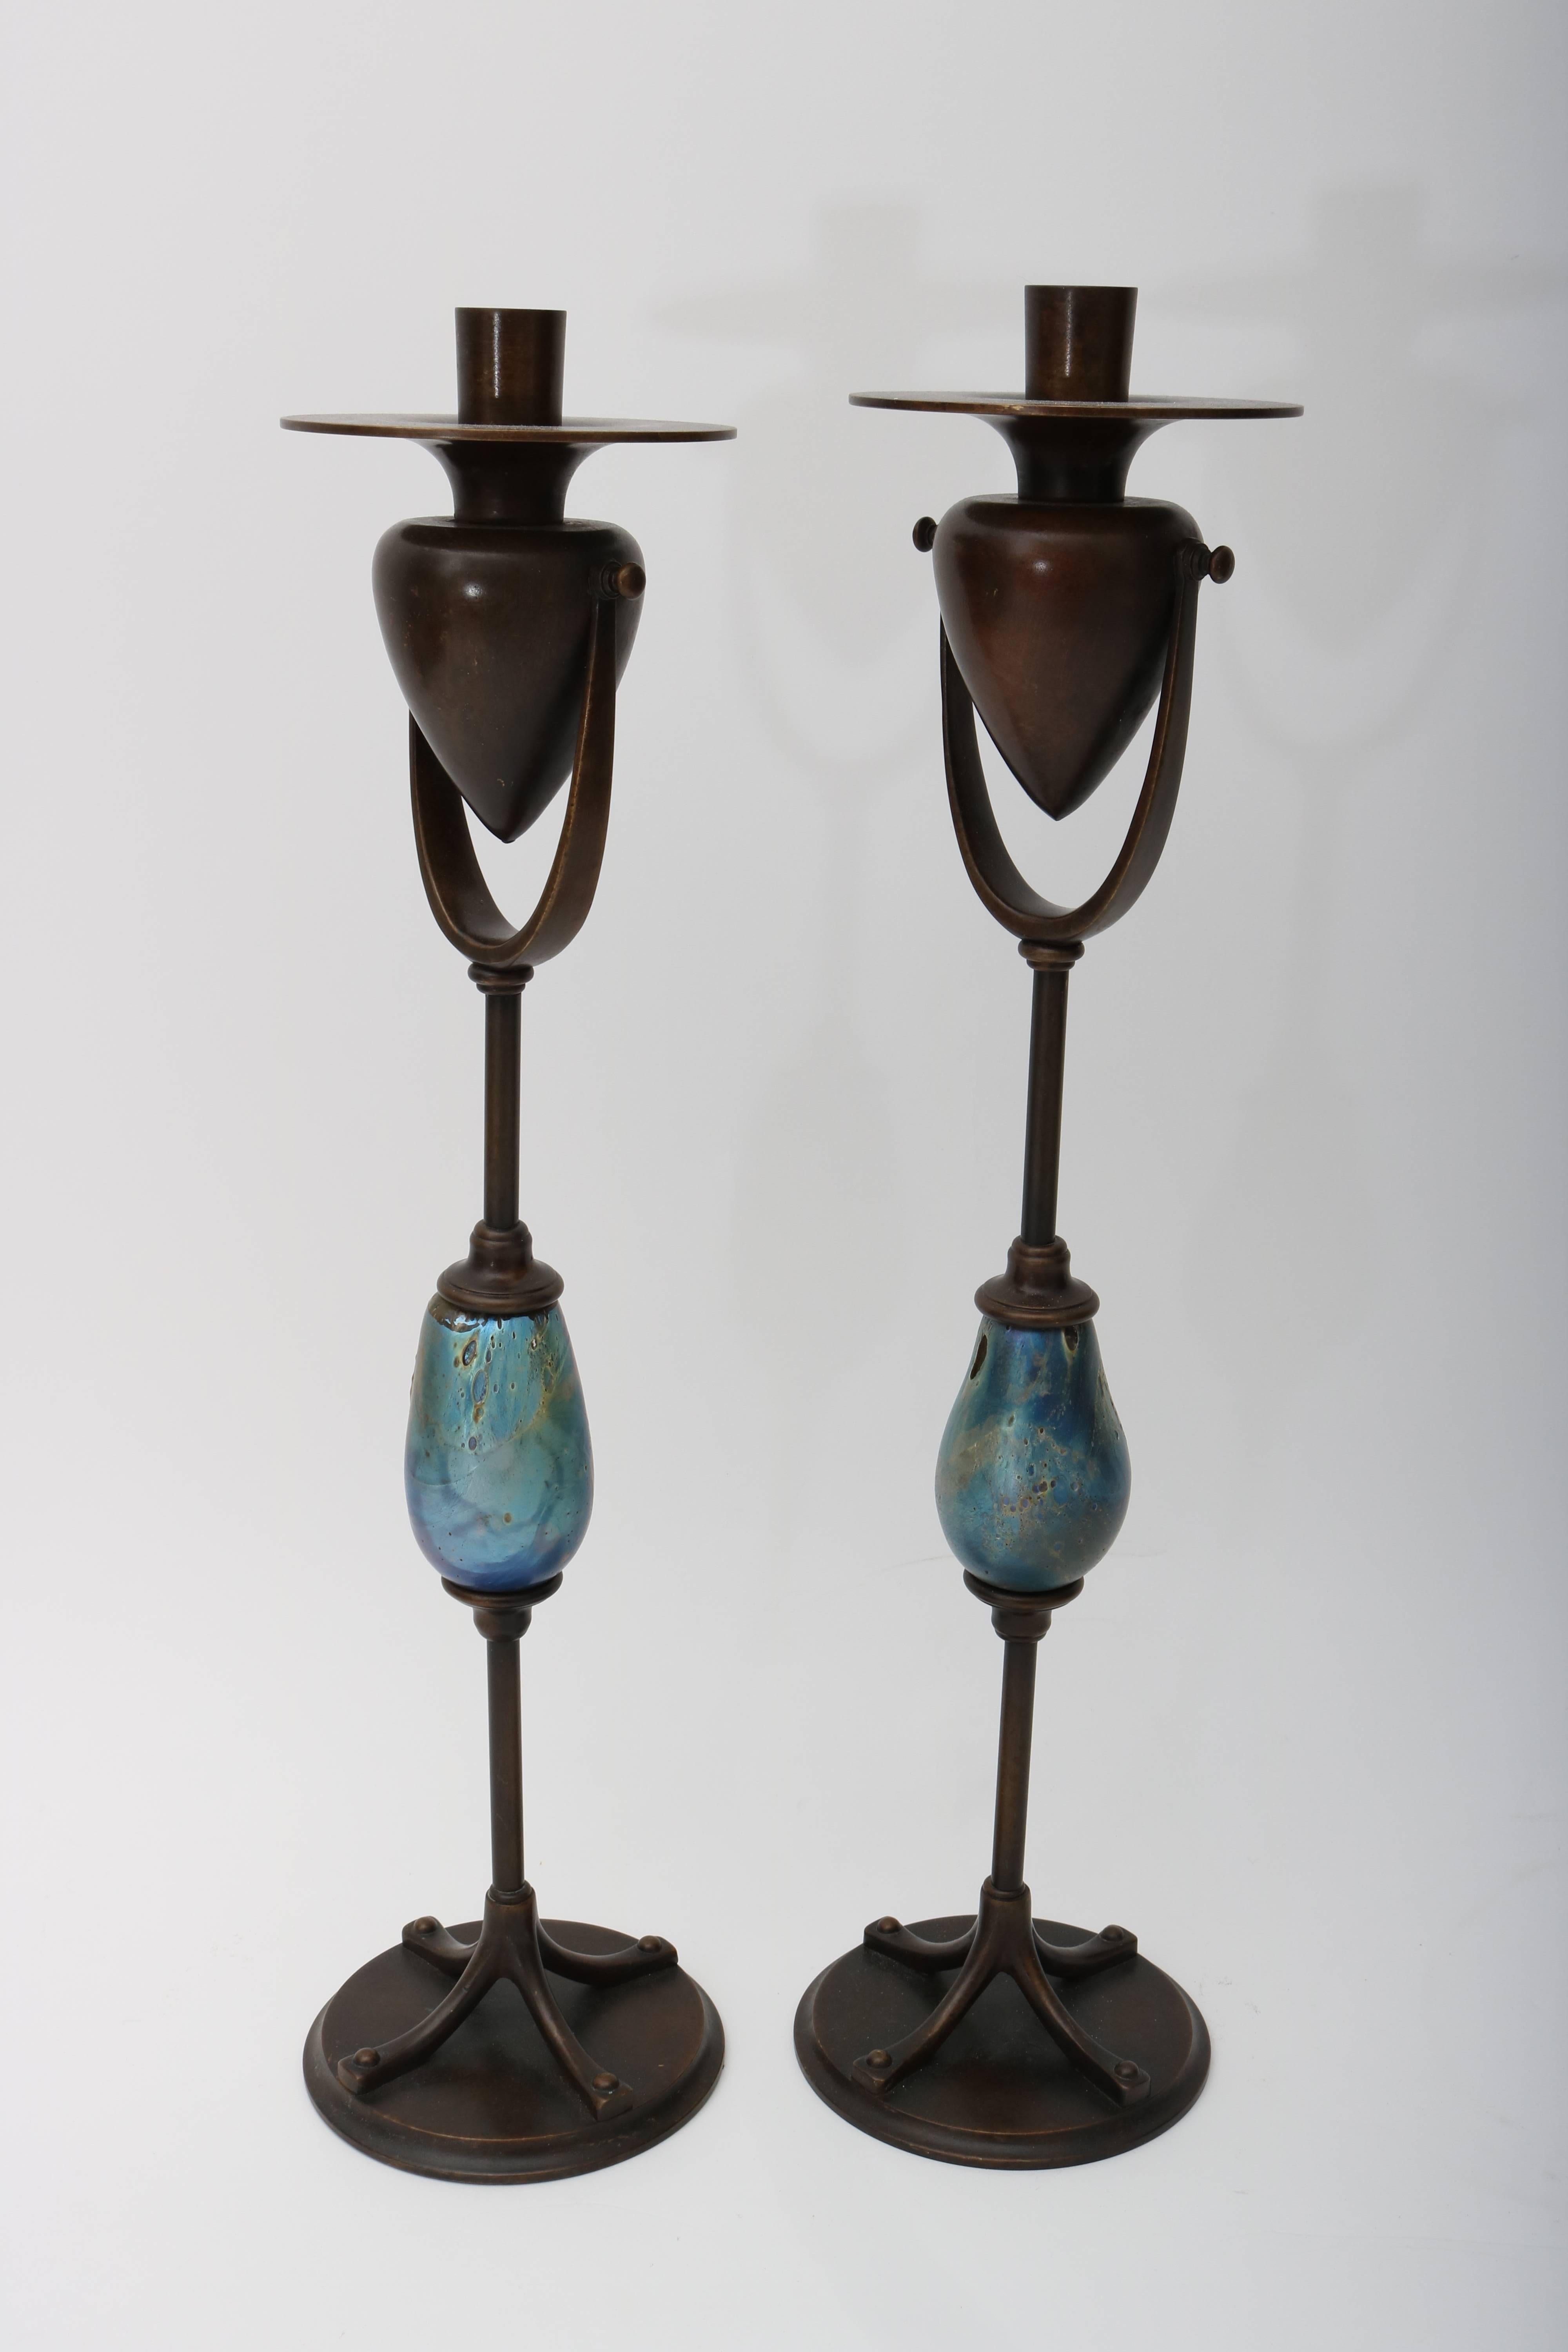 20th Century Pair of Candlesticks, Louis C. Tiffany Furnaces Inc, Bronze and Favrile Glass For Sale